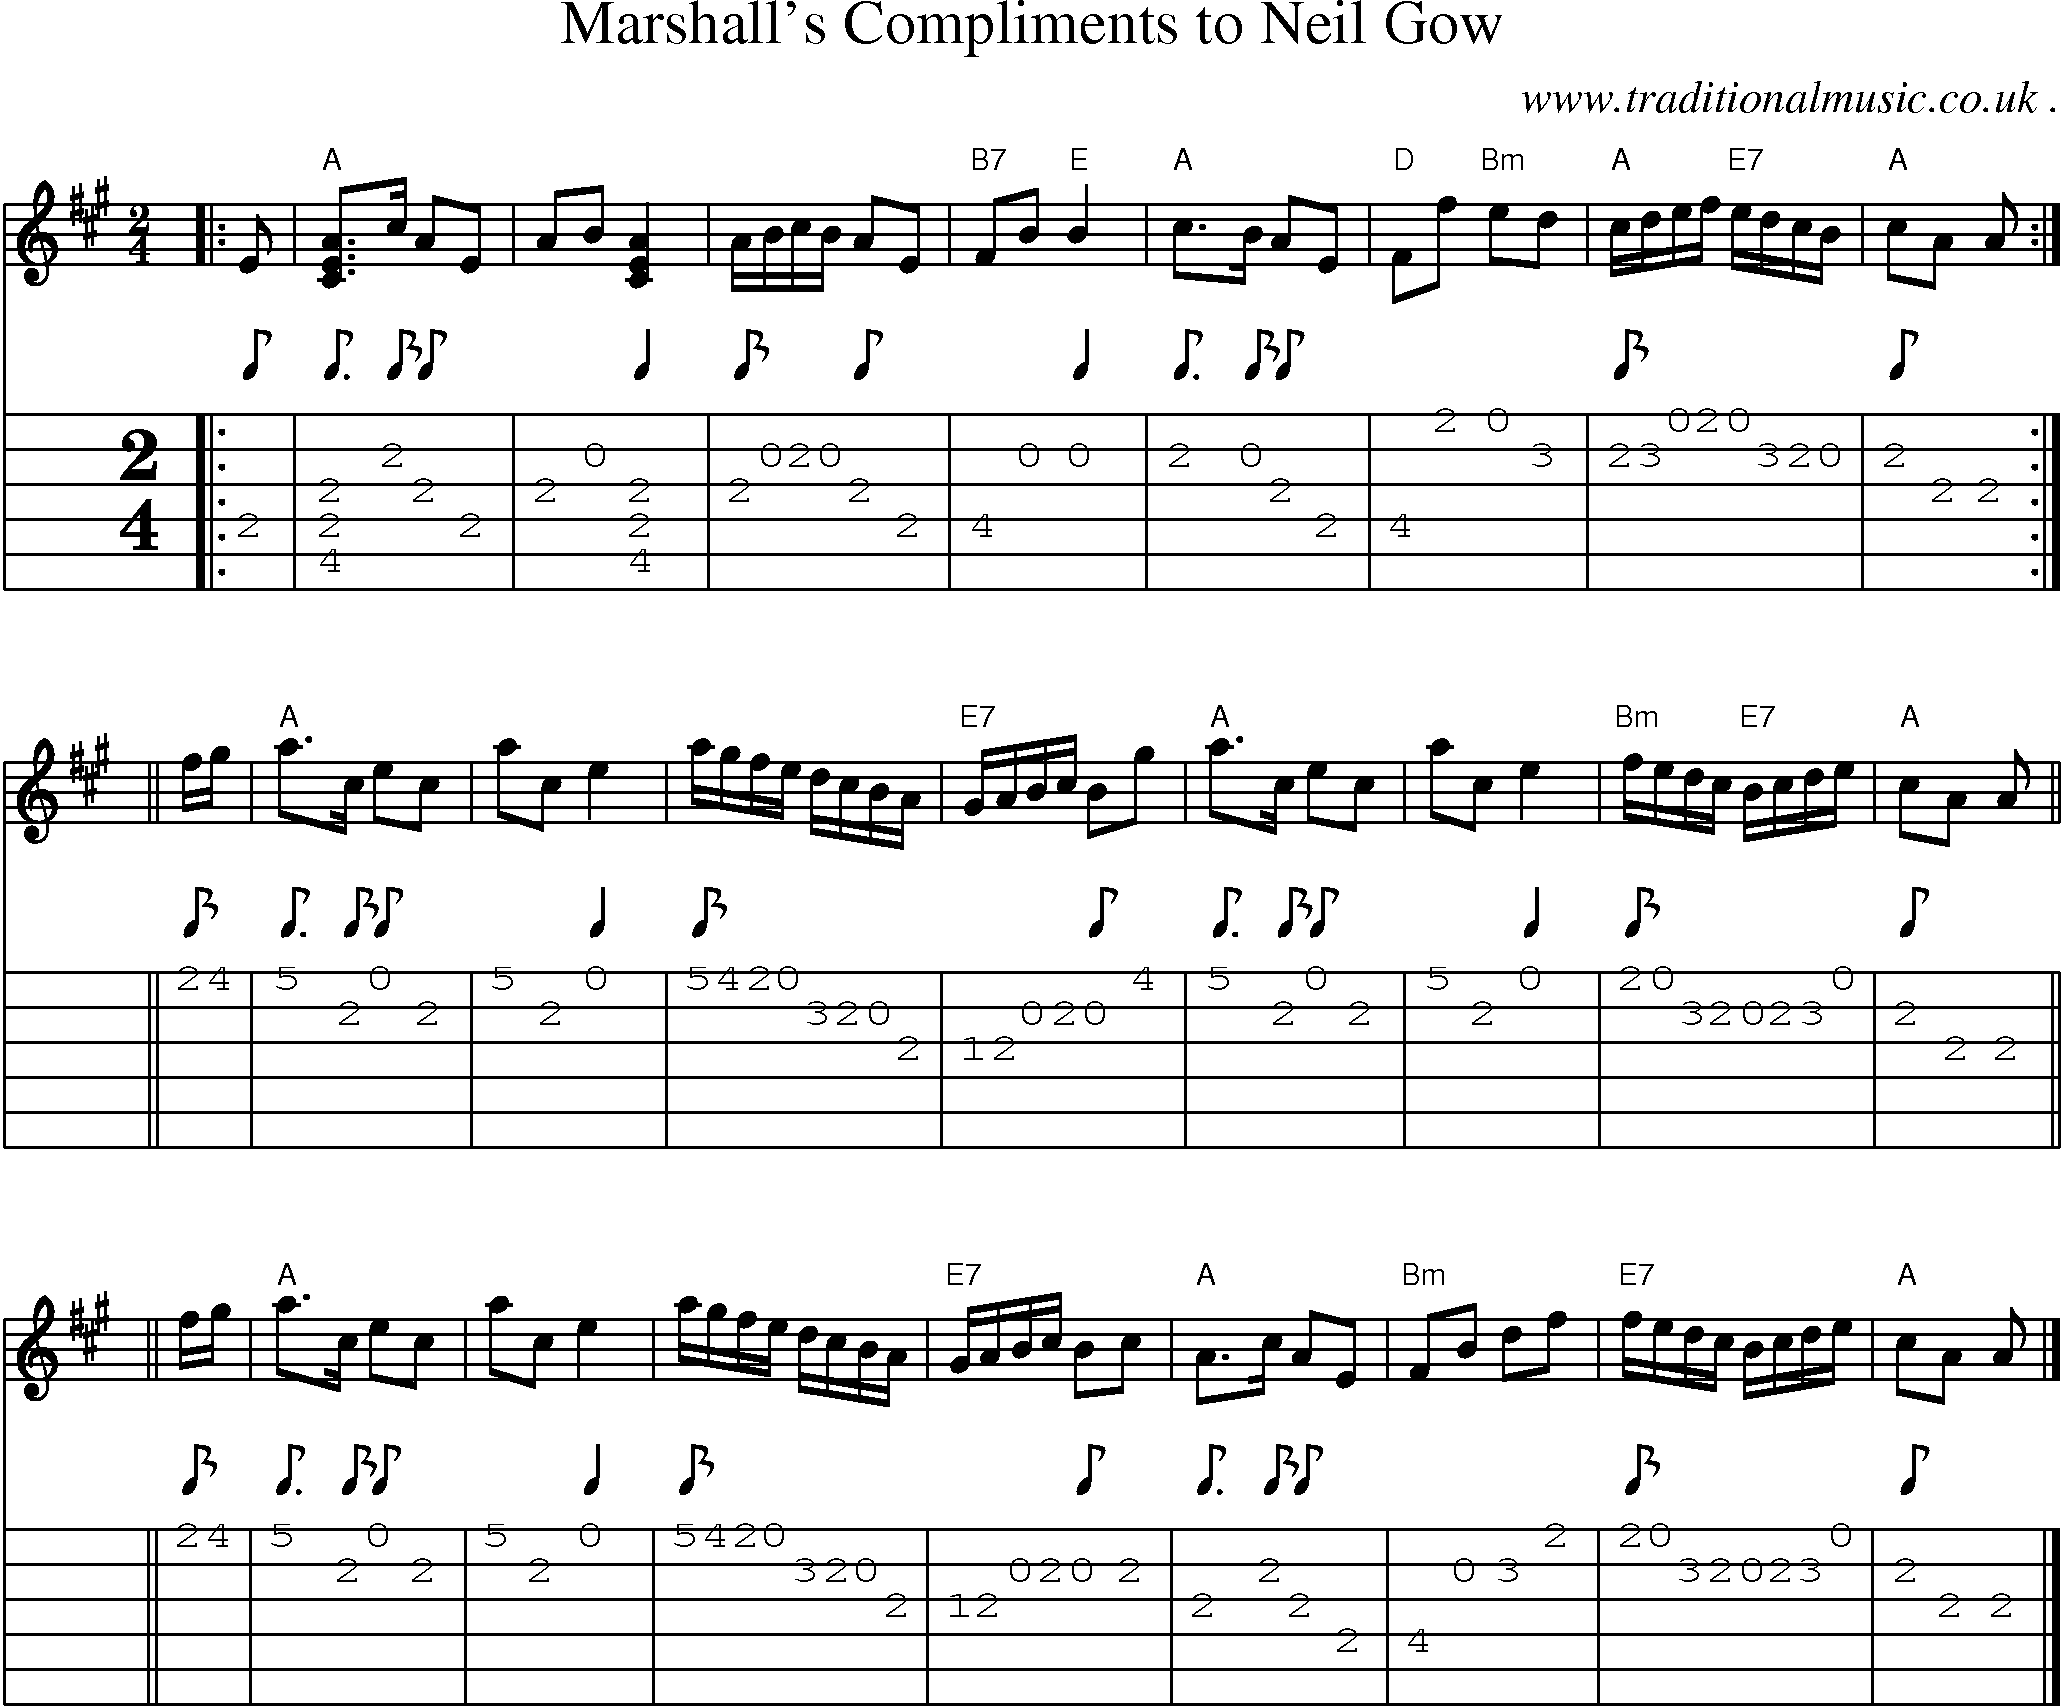 Sheet-music  score, Chords and Guitar Tabs for Marshalls Compliments To Neil Gow